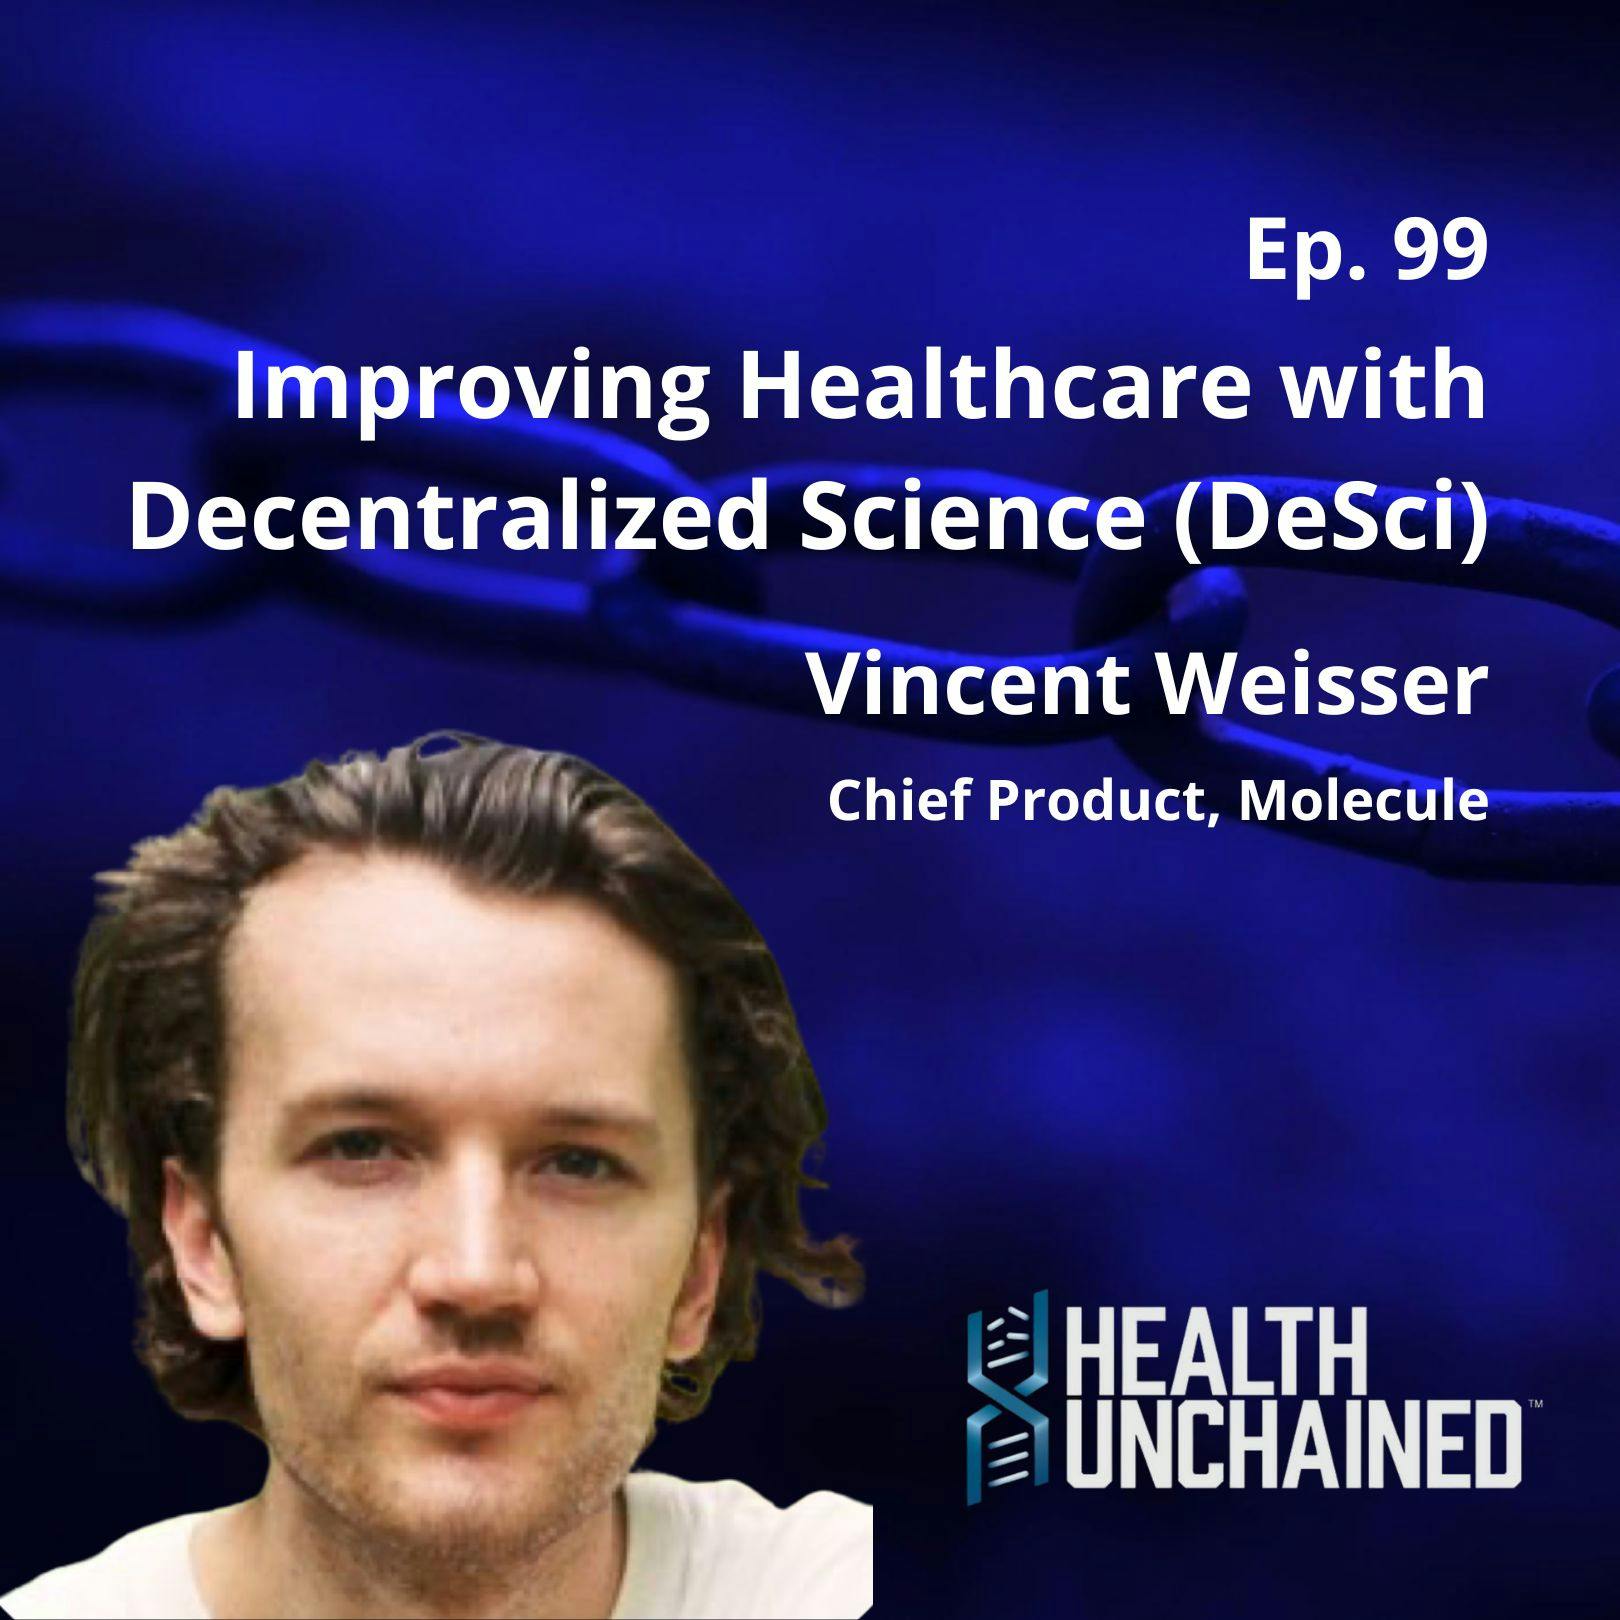 Ep. 99: Improving Healthcare with DeSci – Vincent Weisser (Chief Product at Molecule)